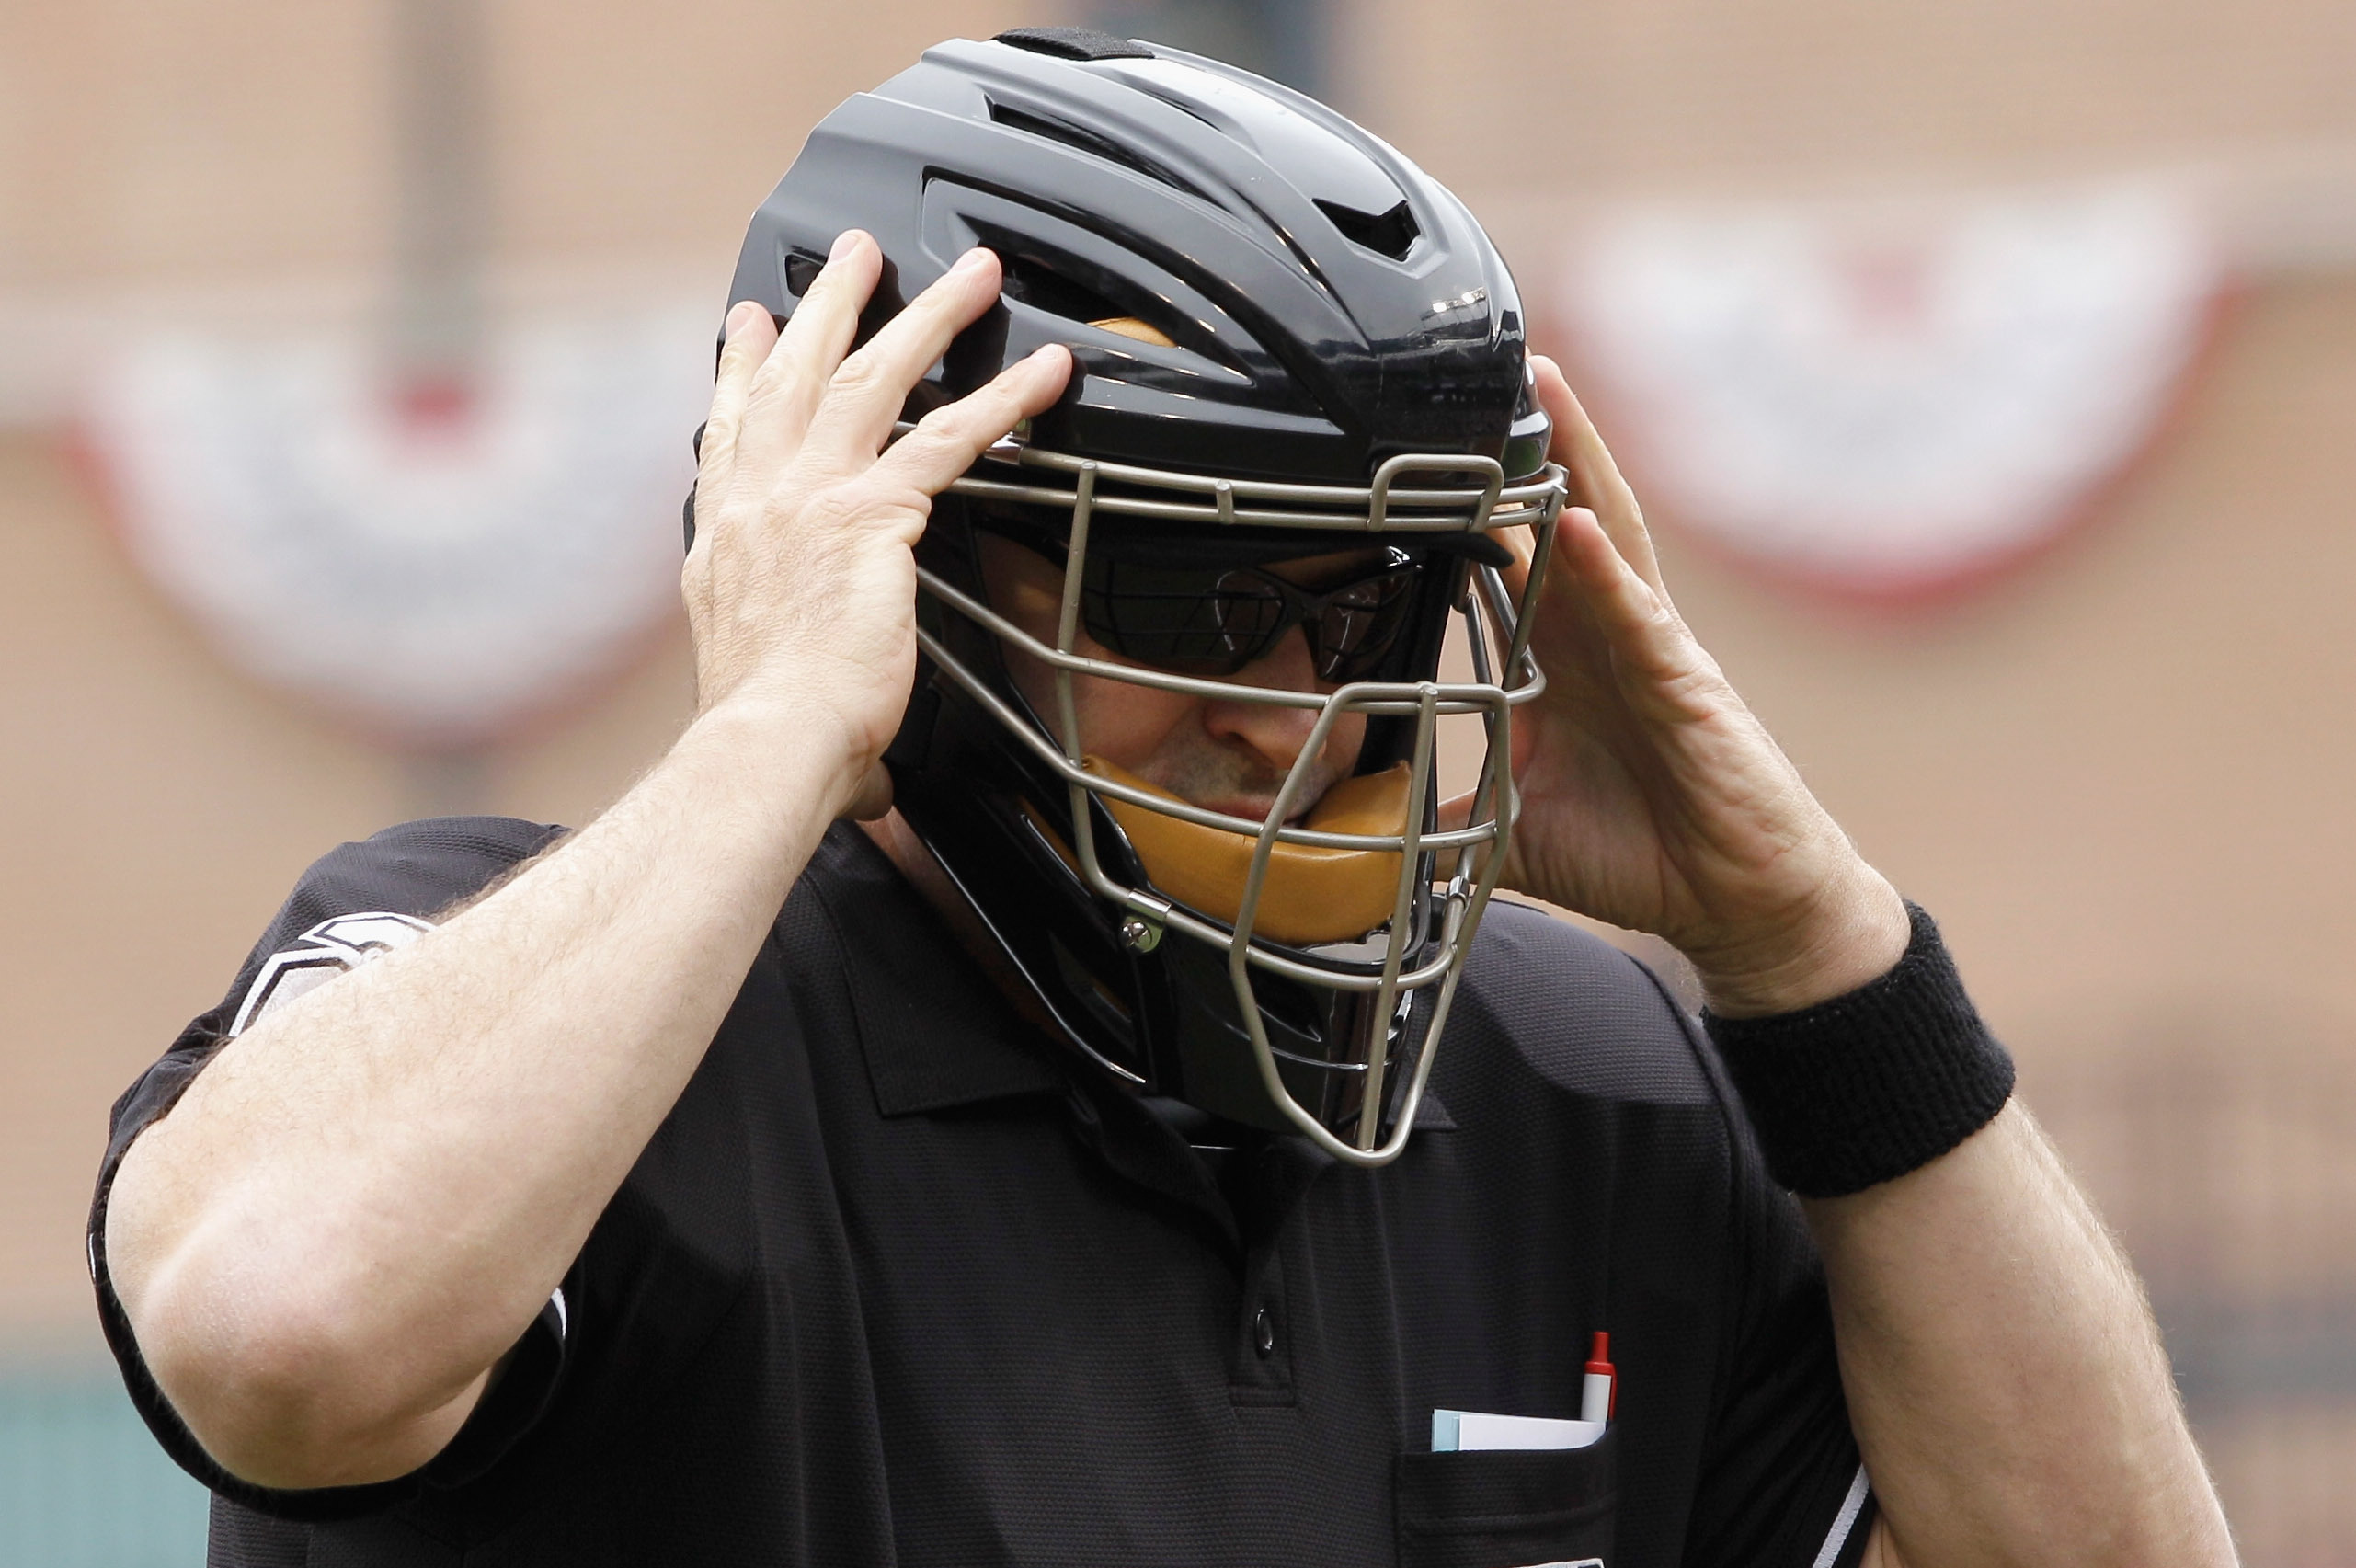 The Safest and Most Comfortable Catcher's Helmets & Masks